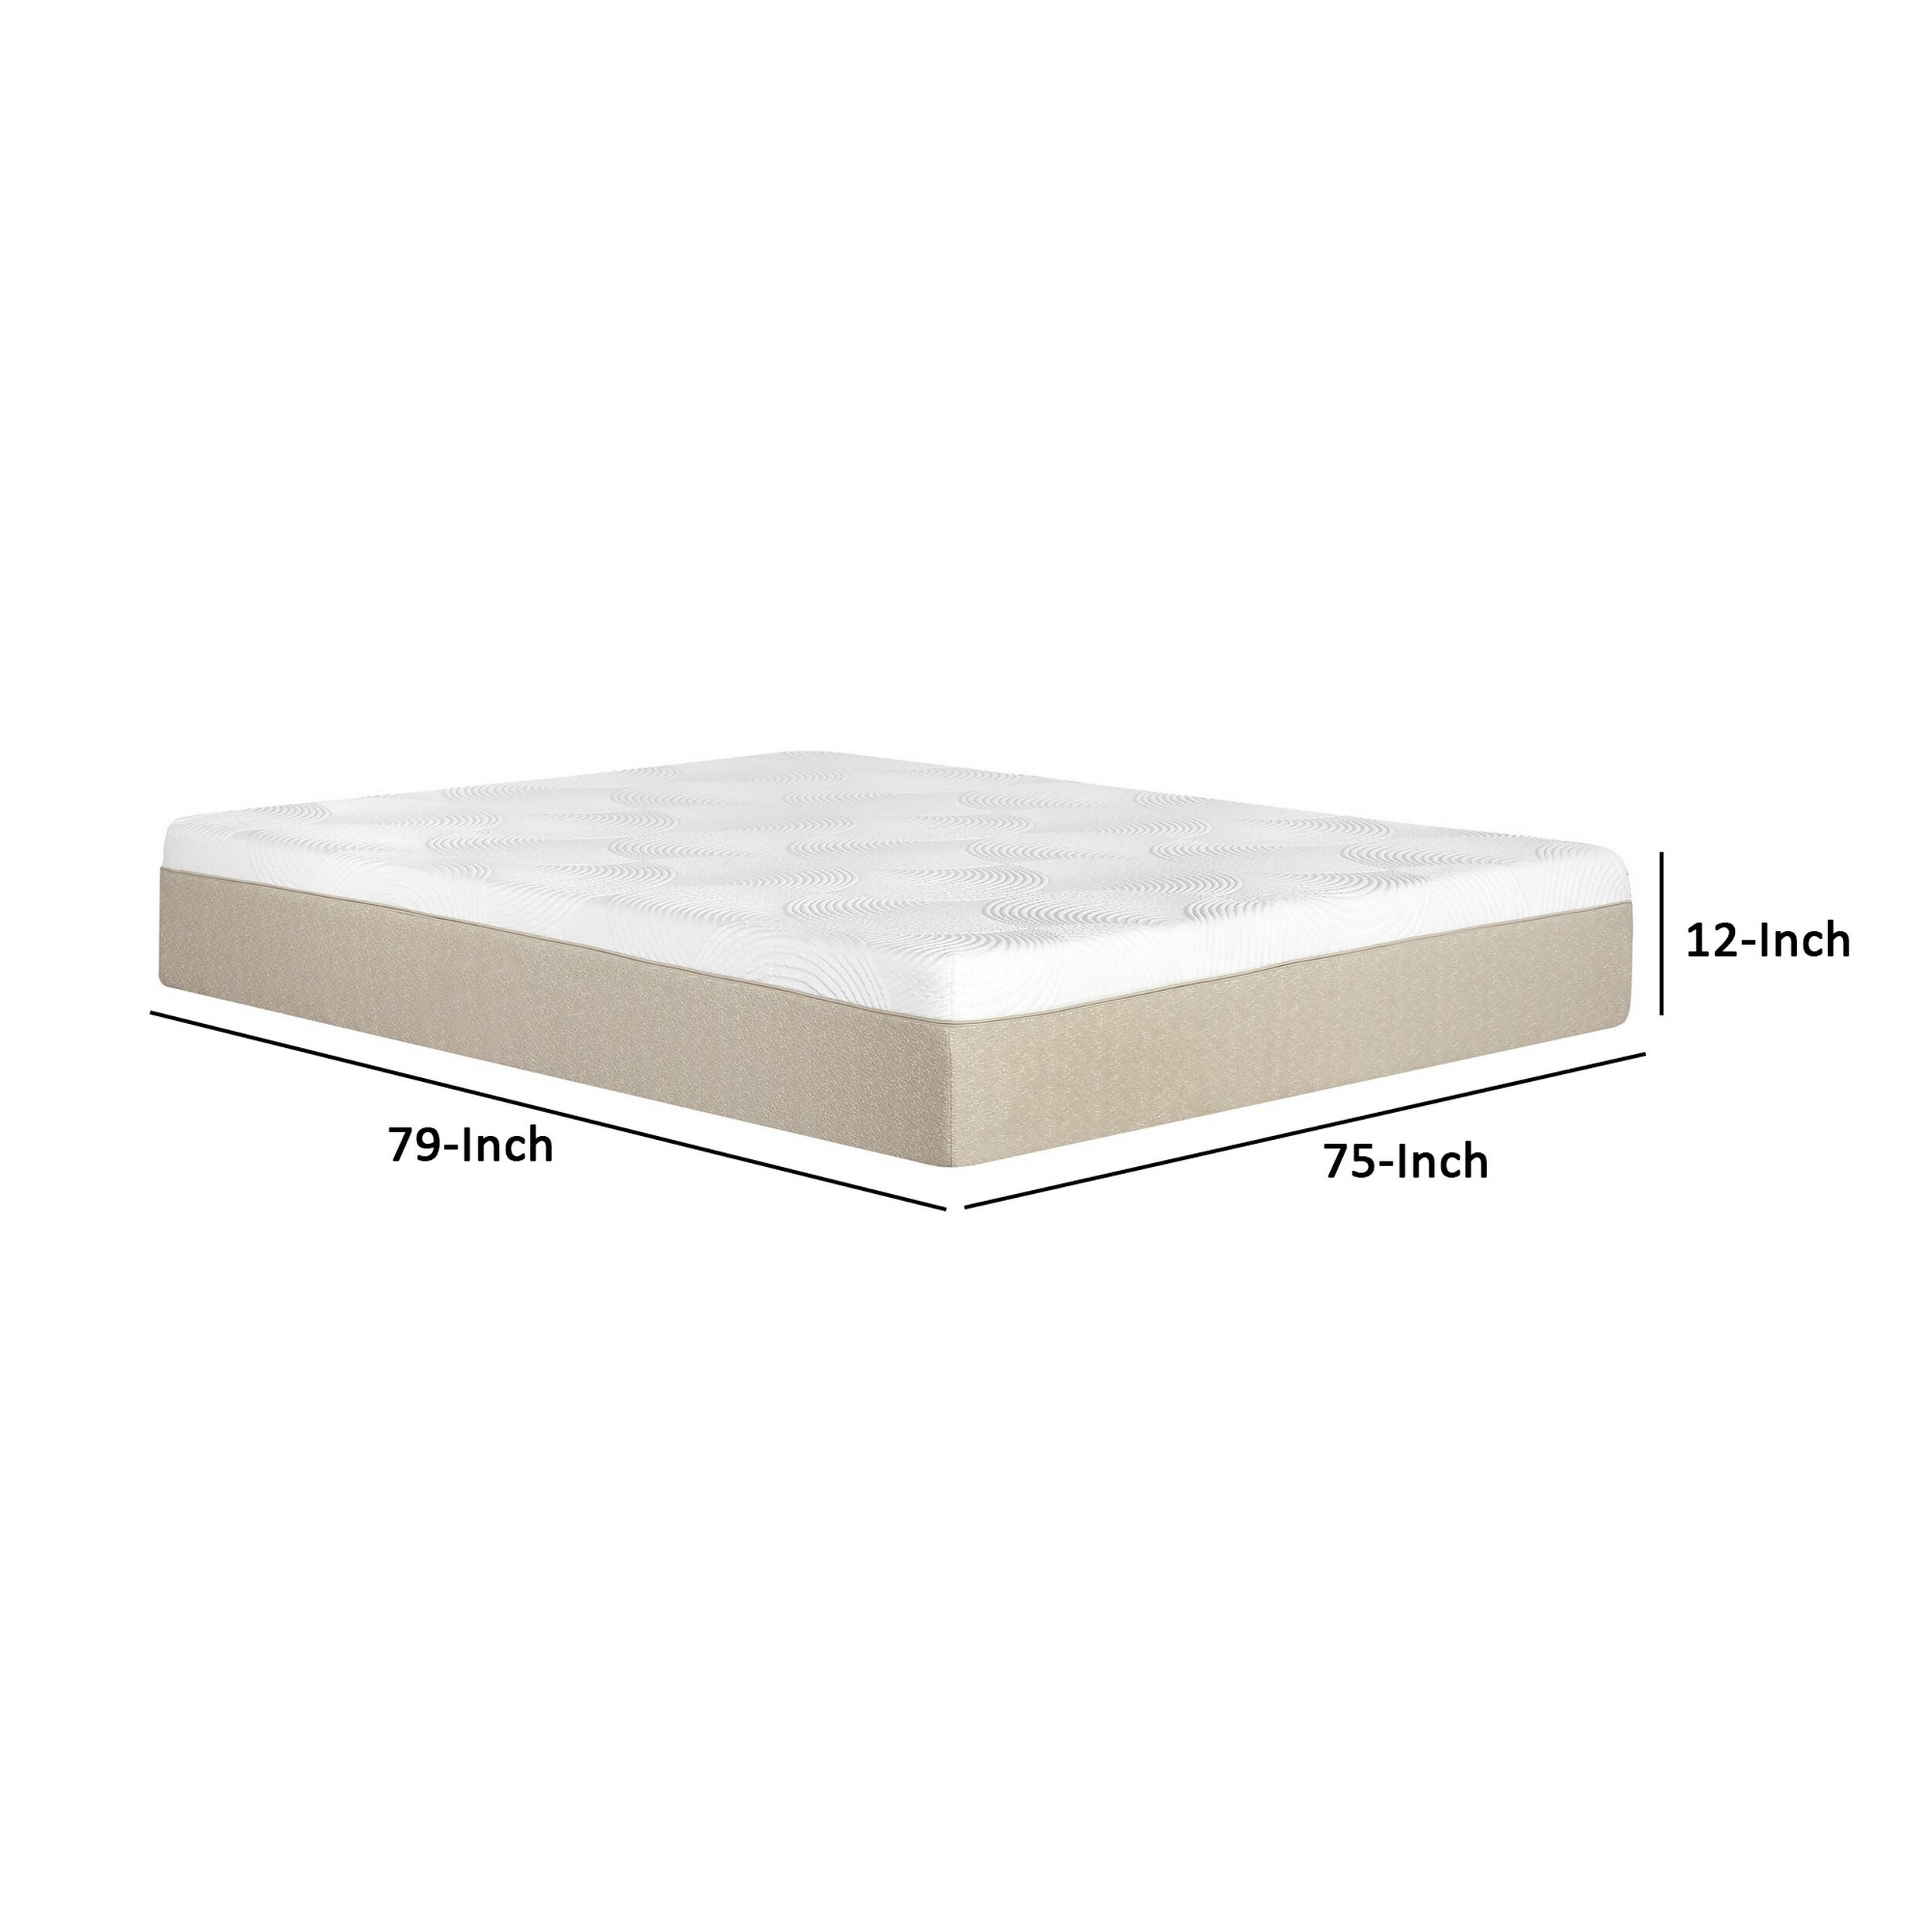 Bree 12 Inch King Mattress, Cooling Gel Infused Memory Foam Layers